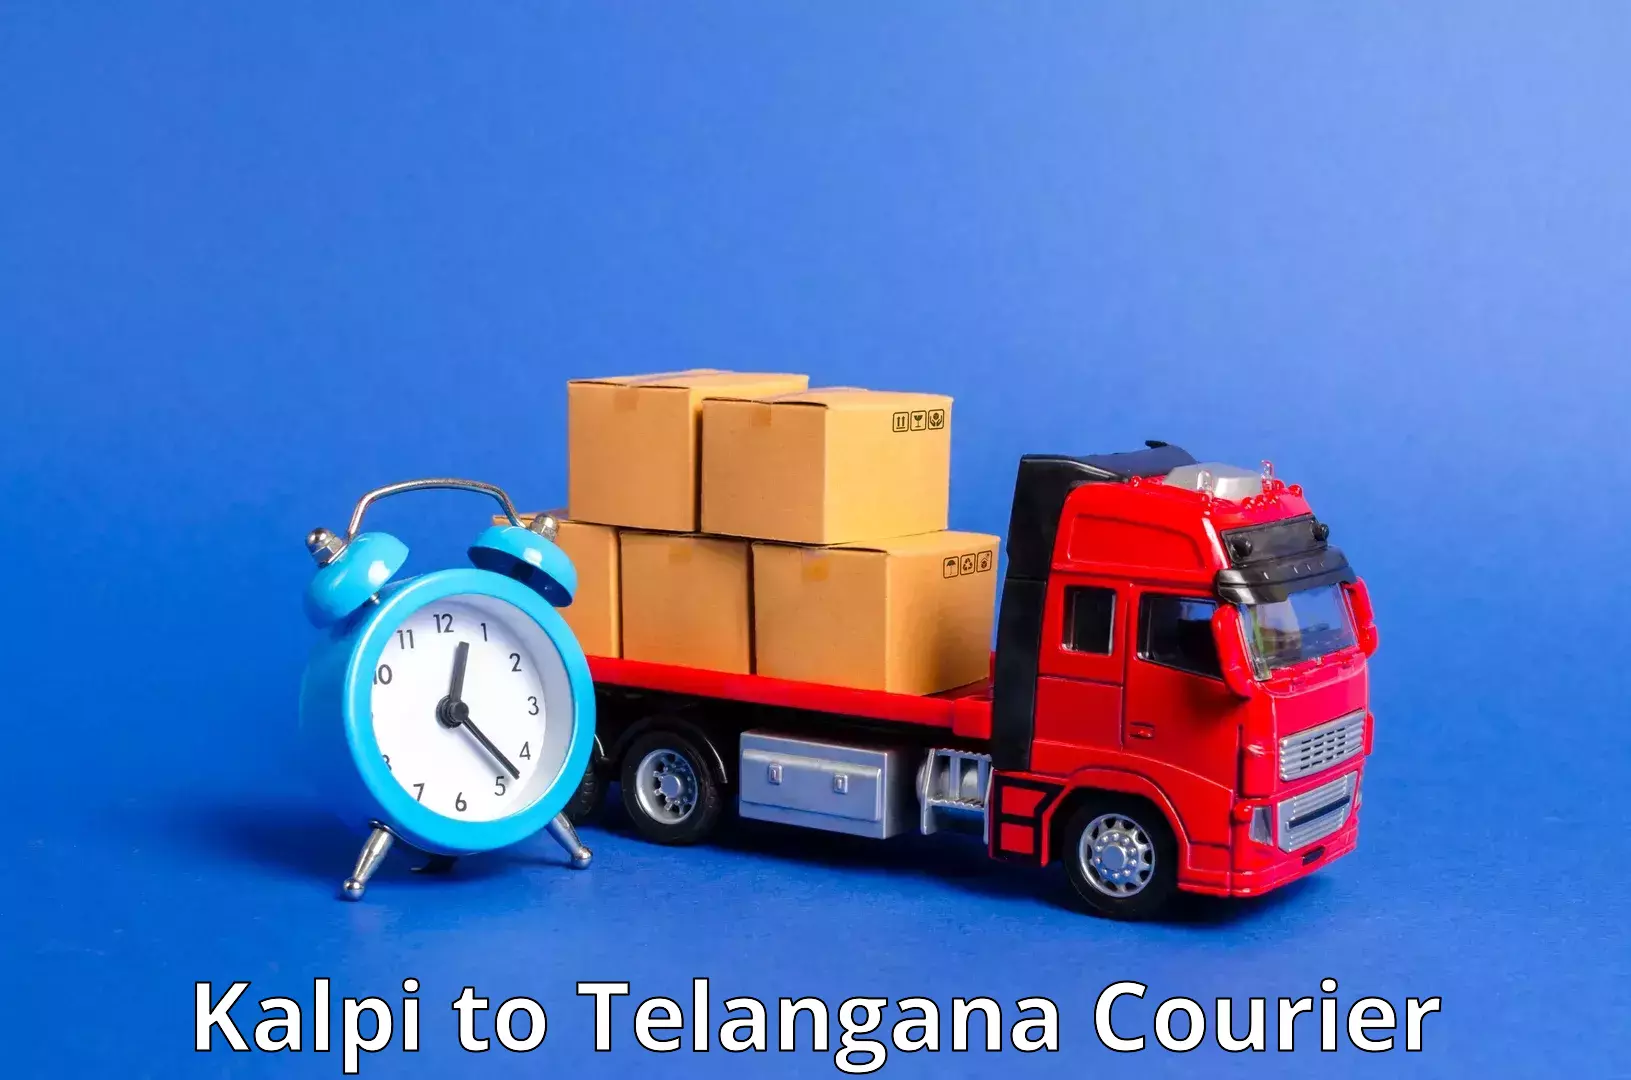 Advanced shipping technology in Kalpi to Manneguda